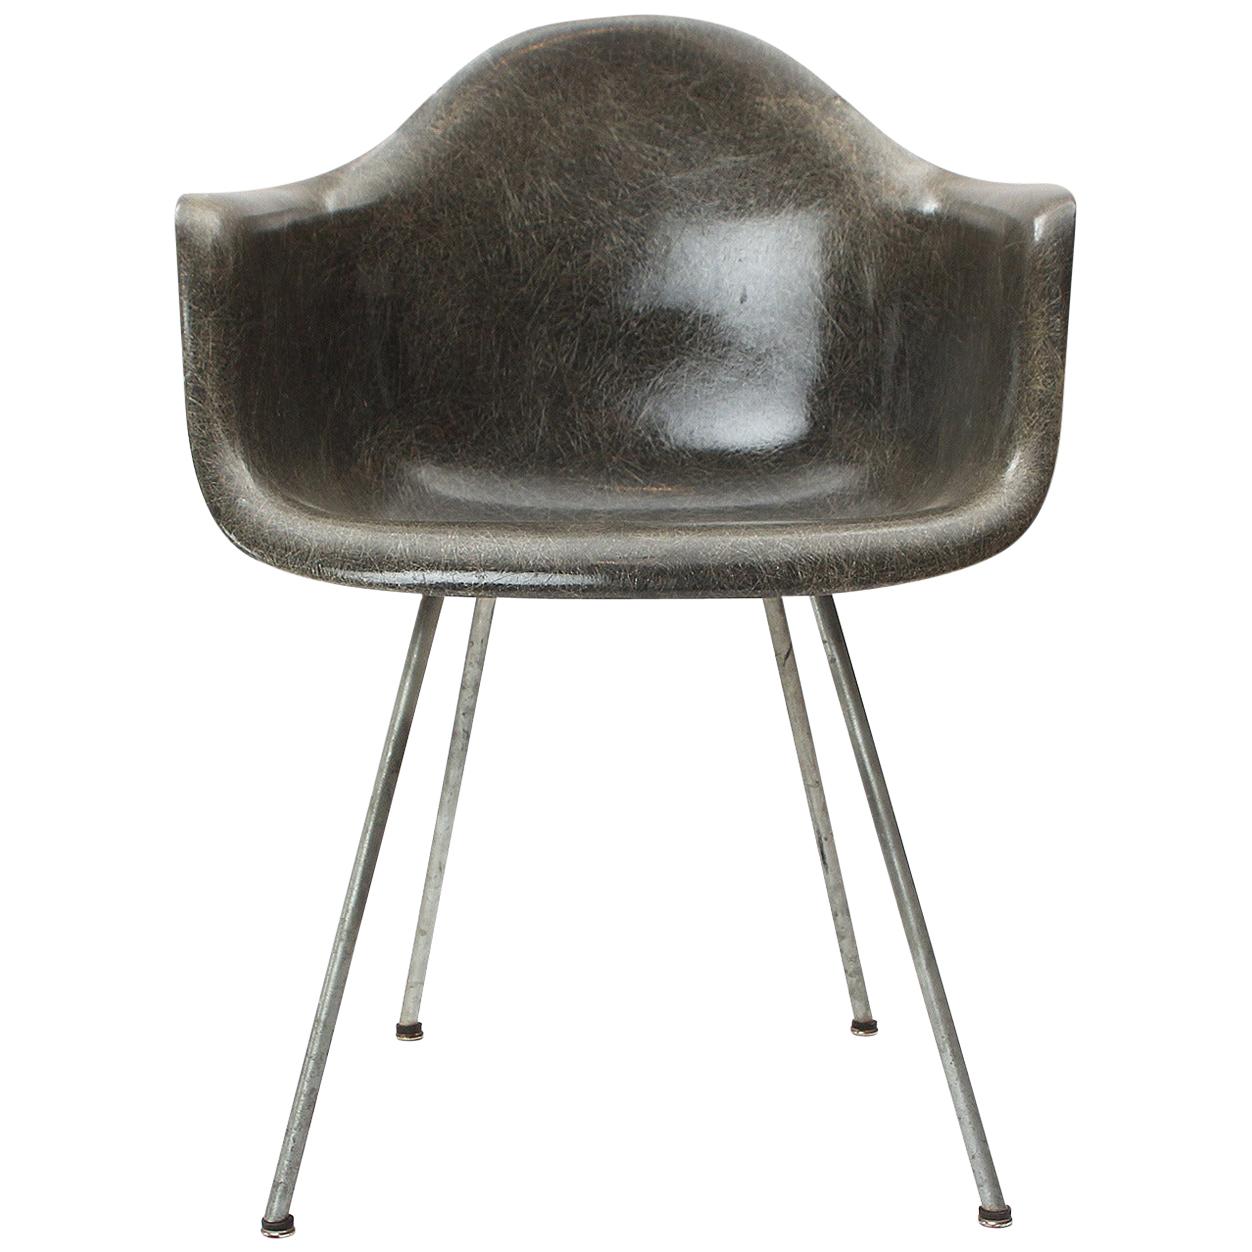 DAX-Sessel von Charles & Ray Eames